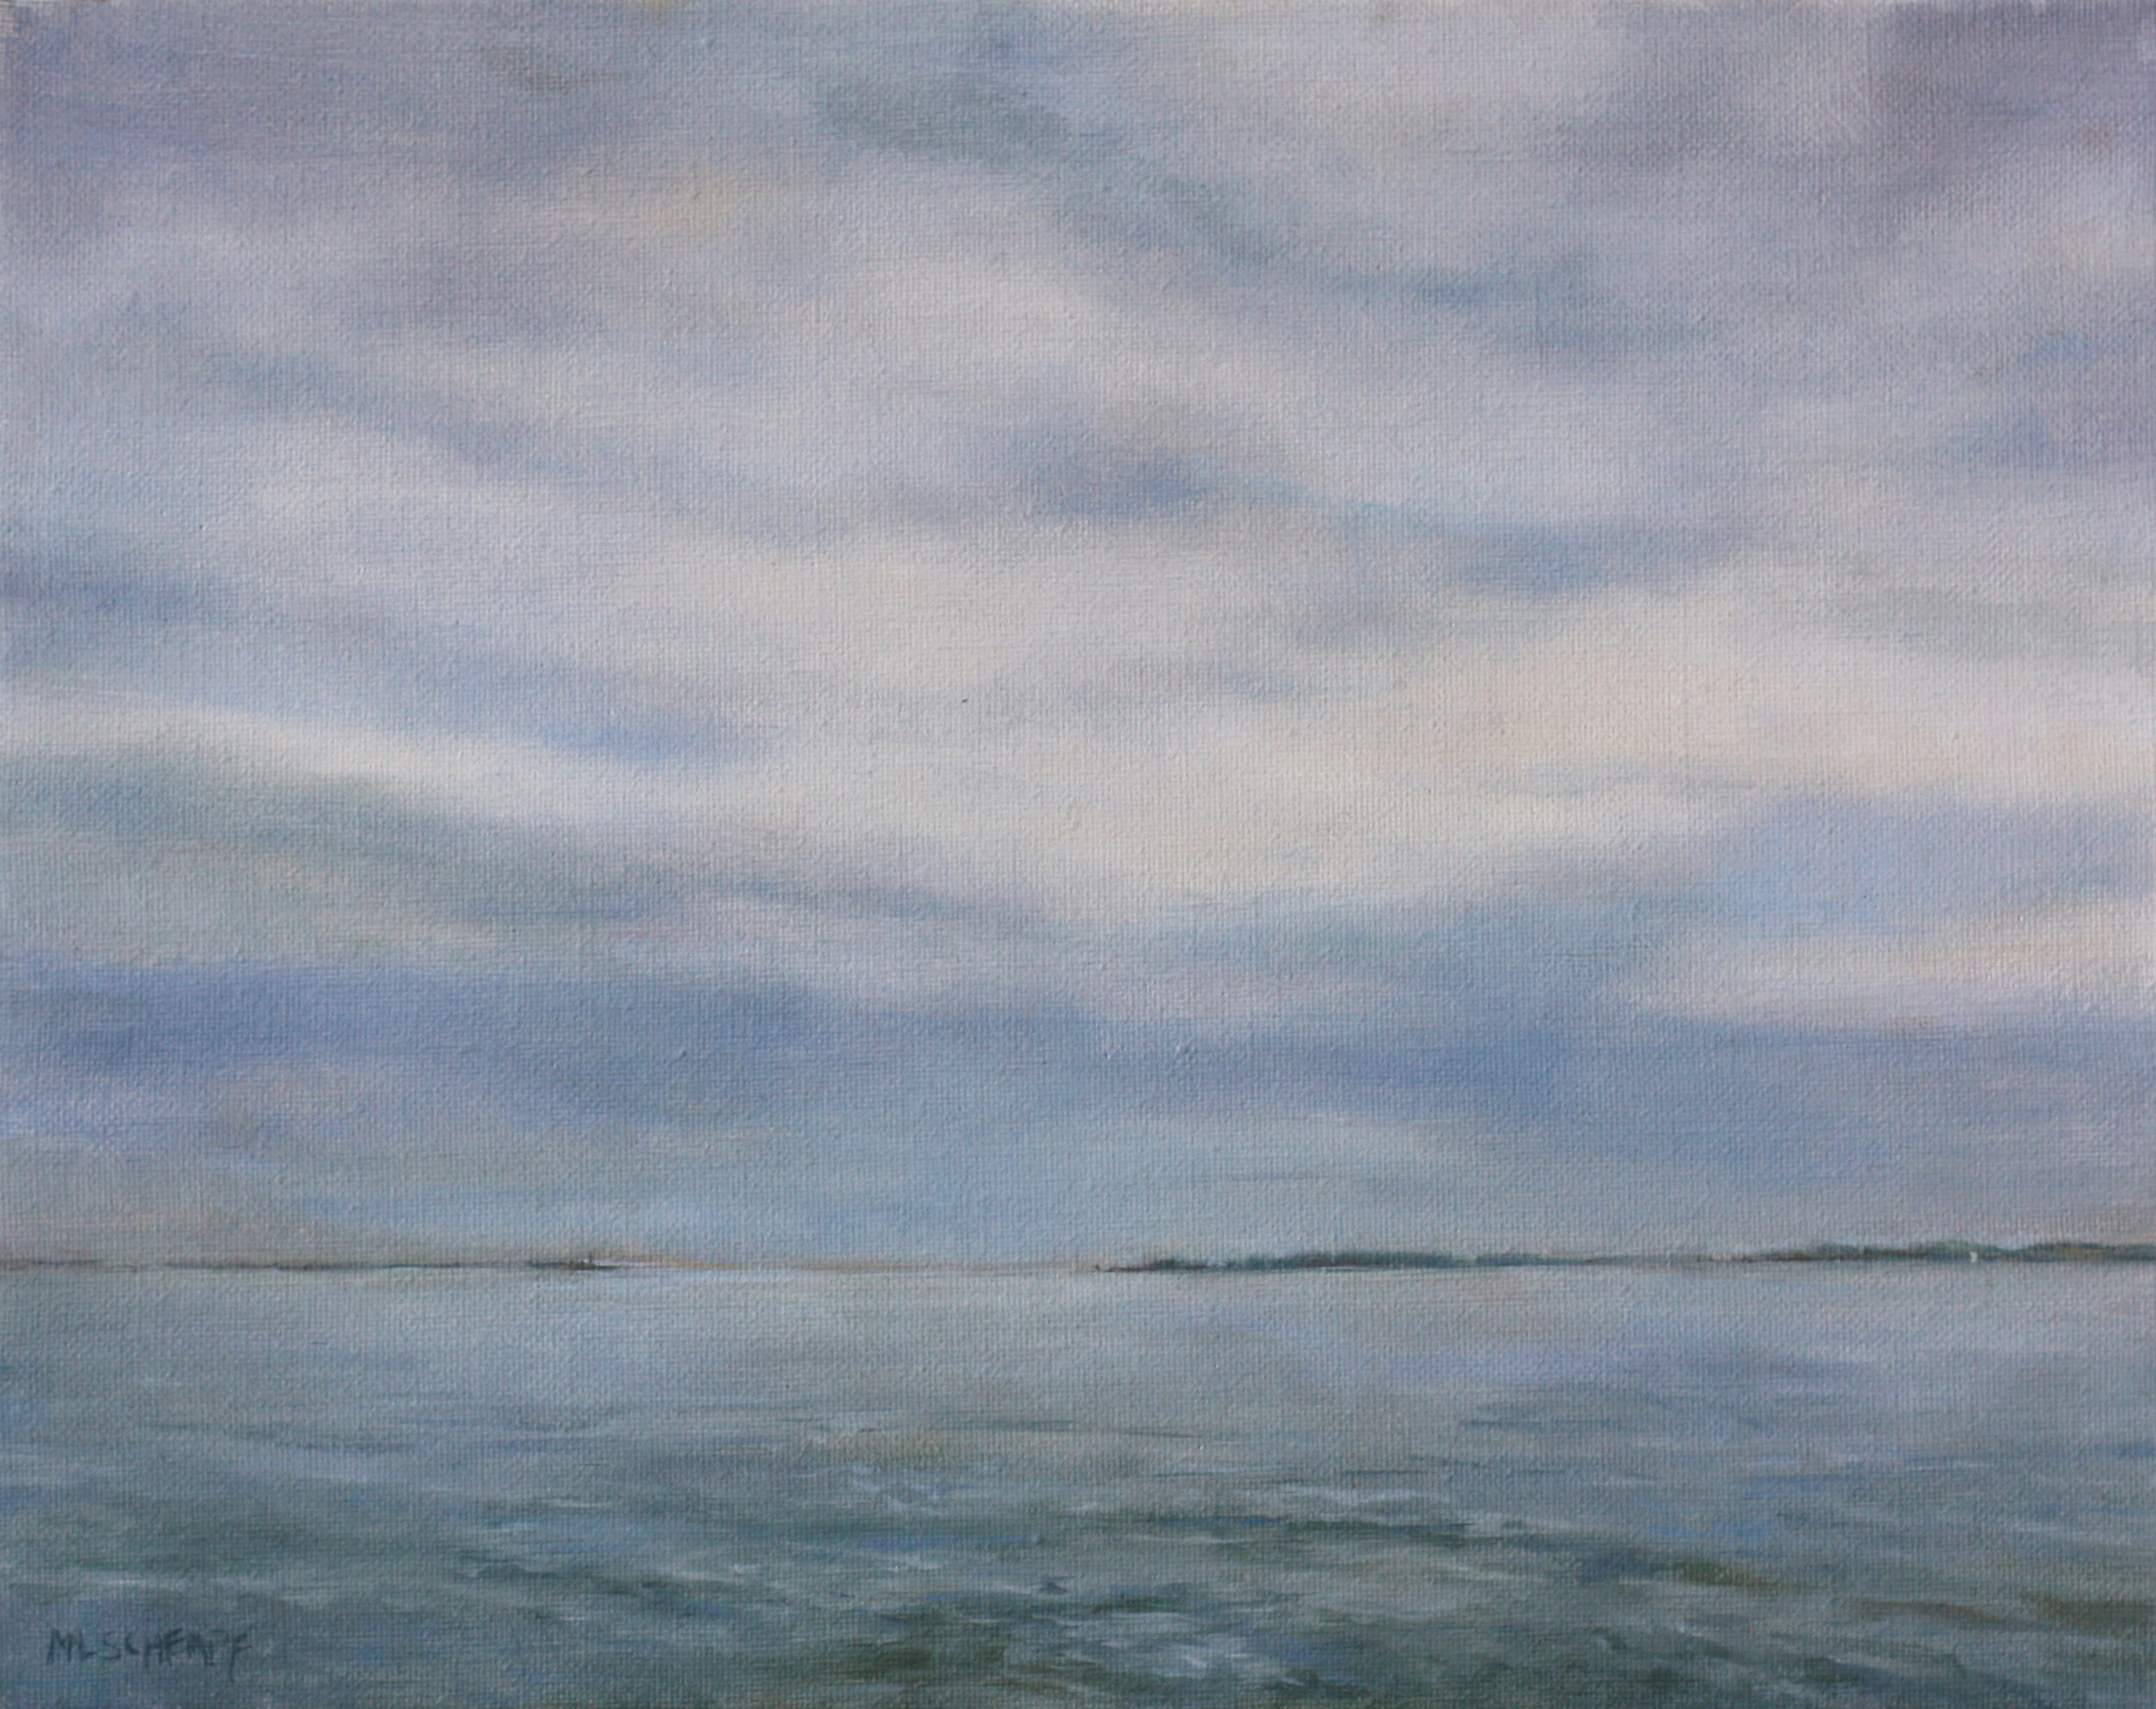  Mary Lou Schempf  Stonington Sea View,  11” x 14”, oil on linen   (private collection)  